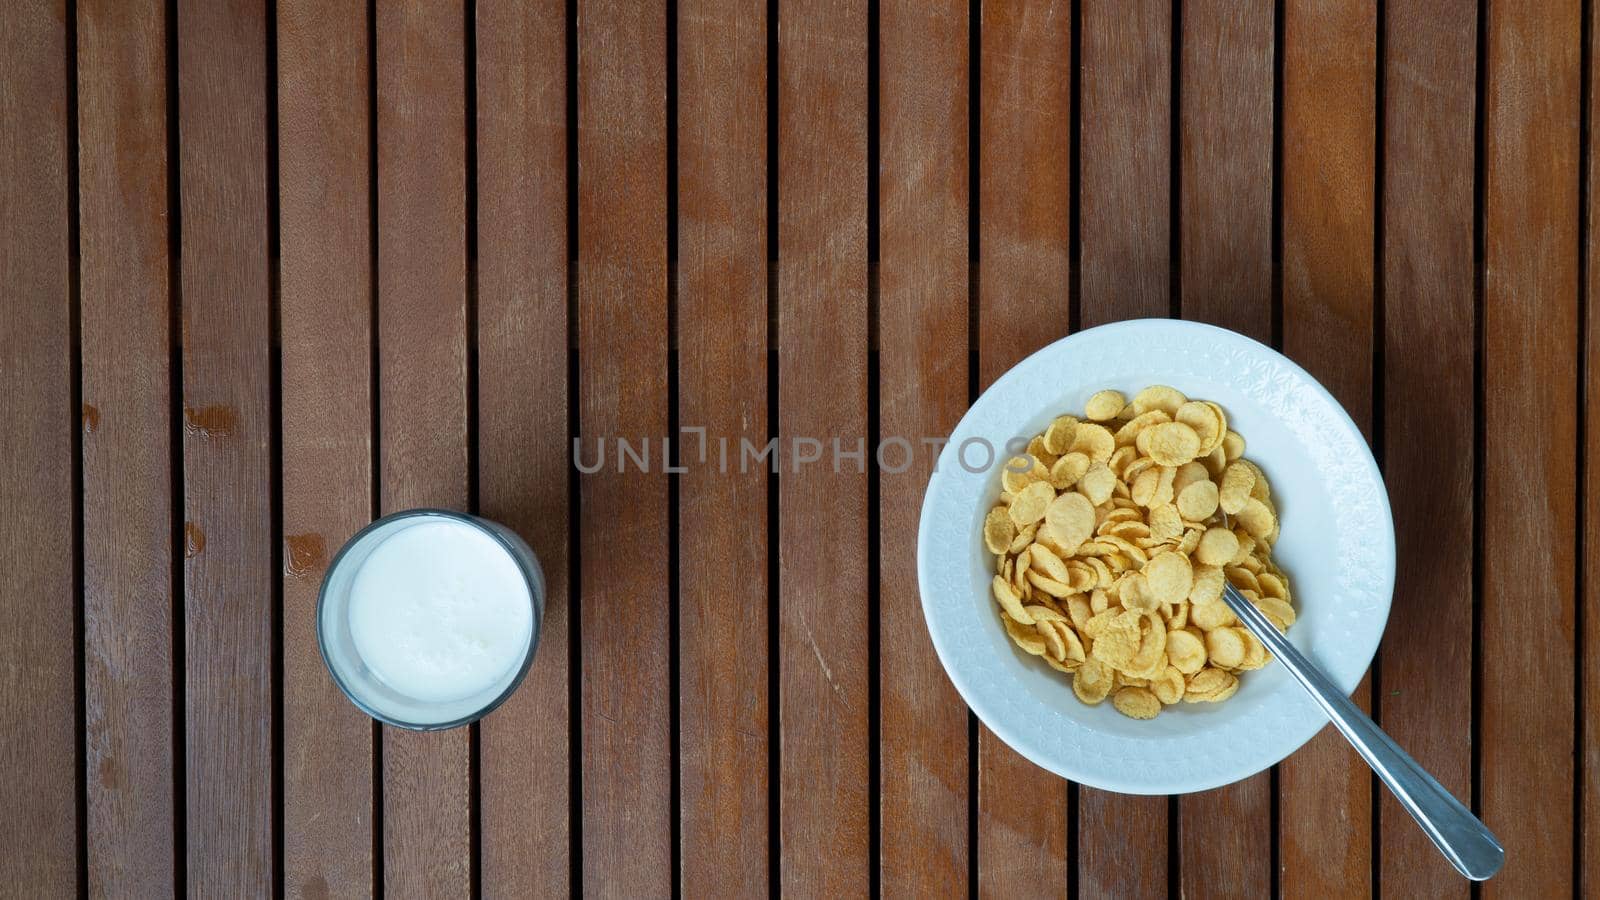 A plate of corn flakes on the right and a glass of milk on the left background by voktybre